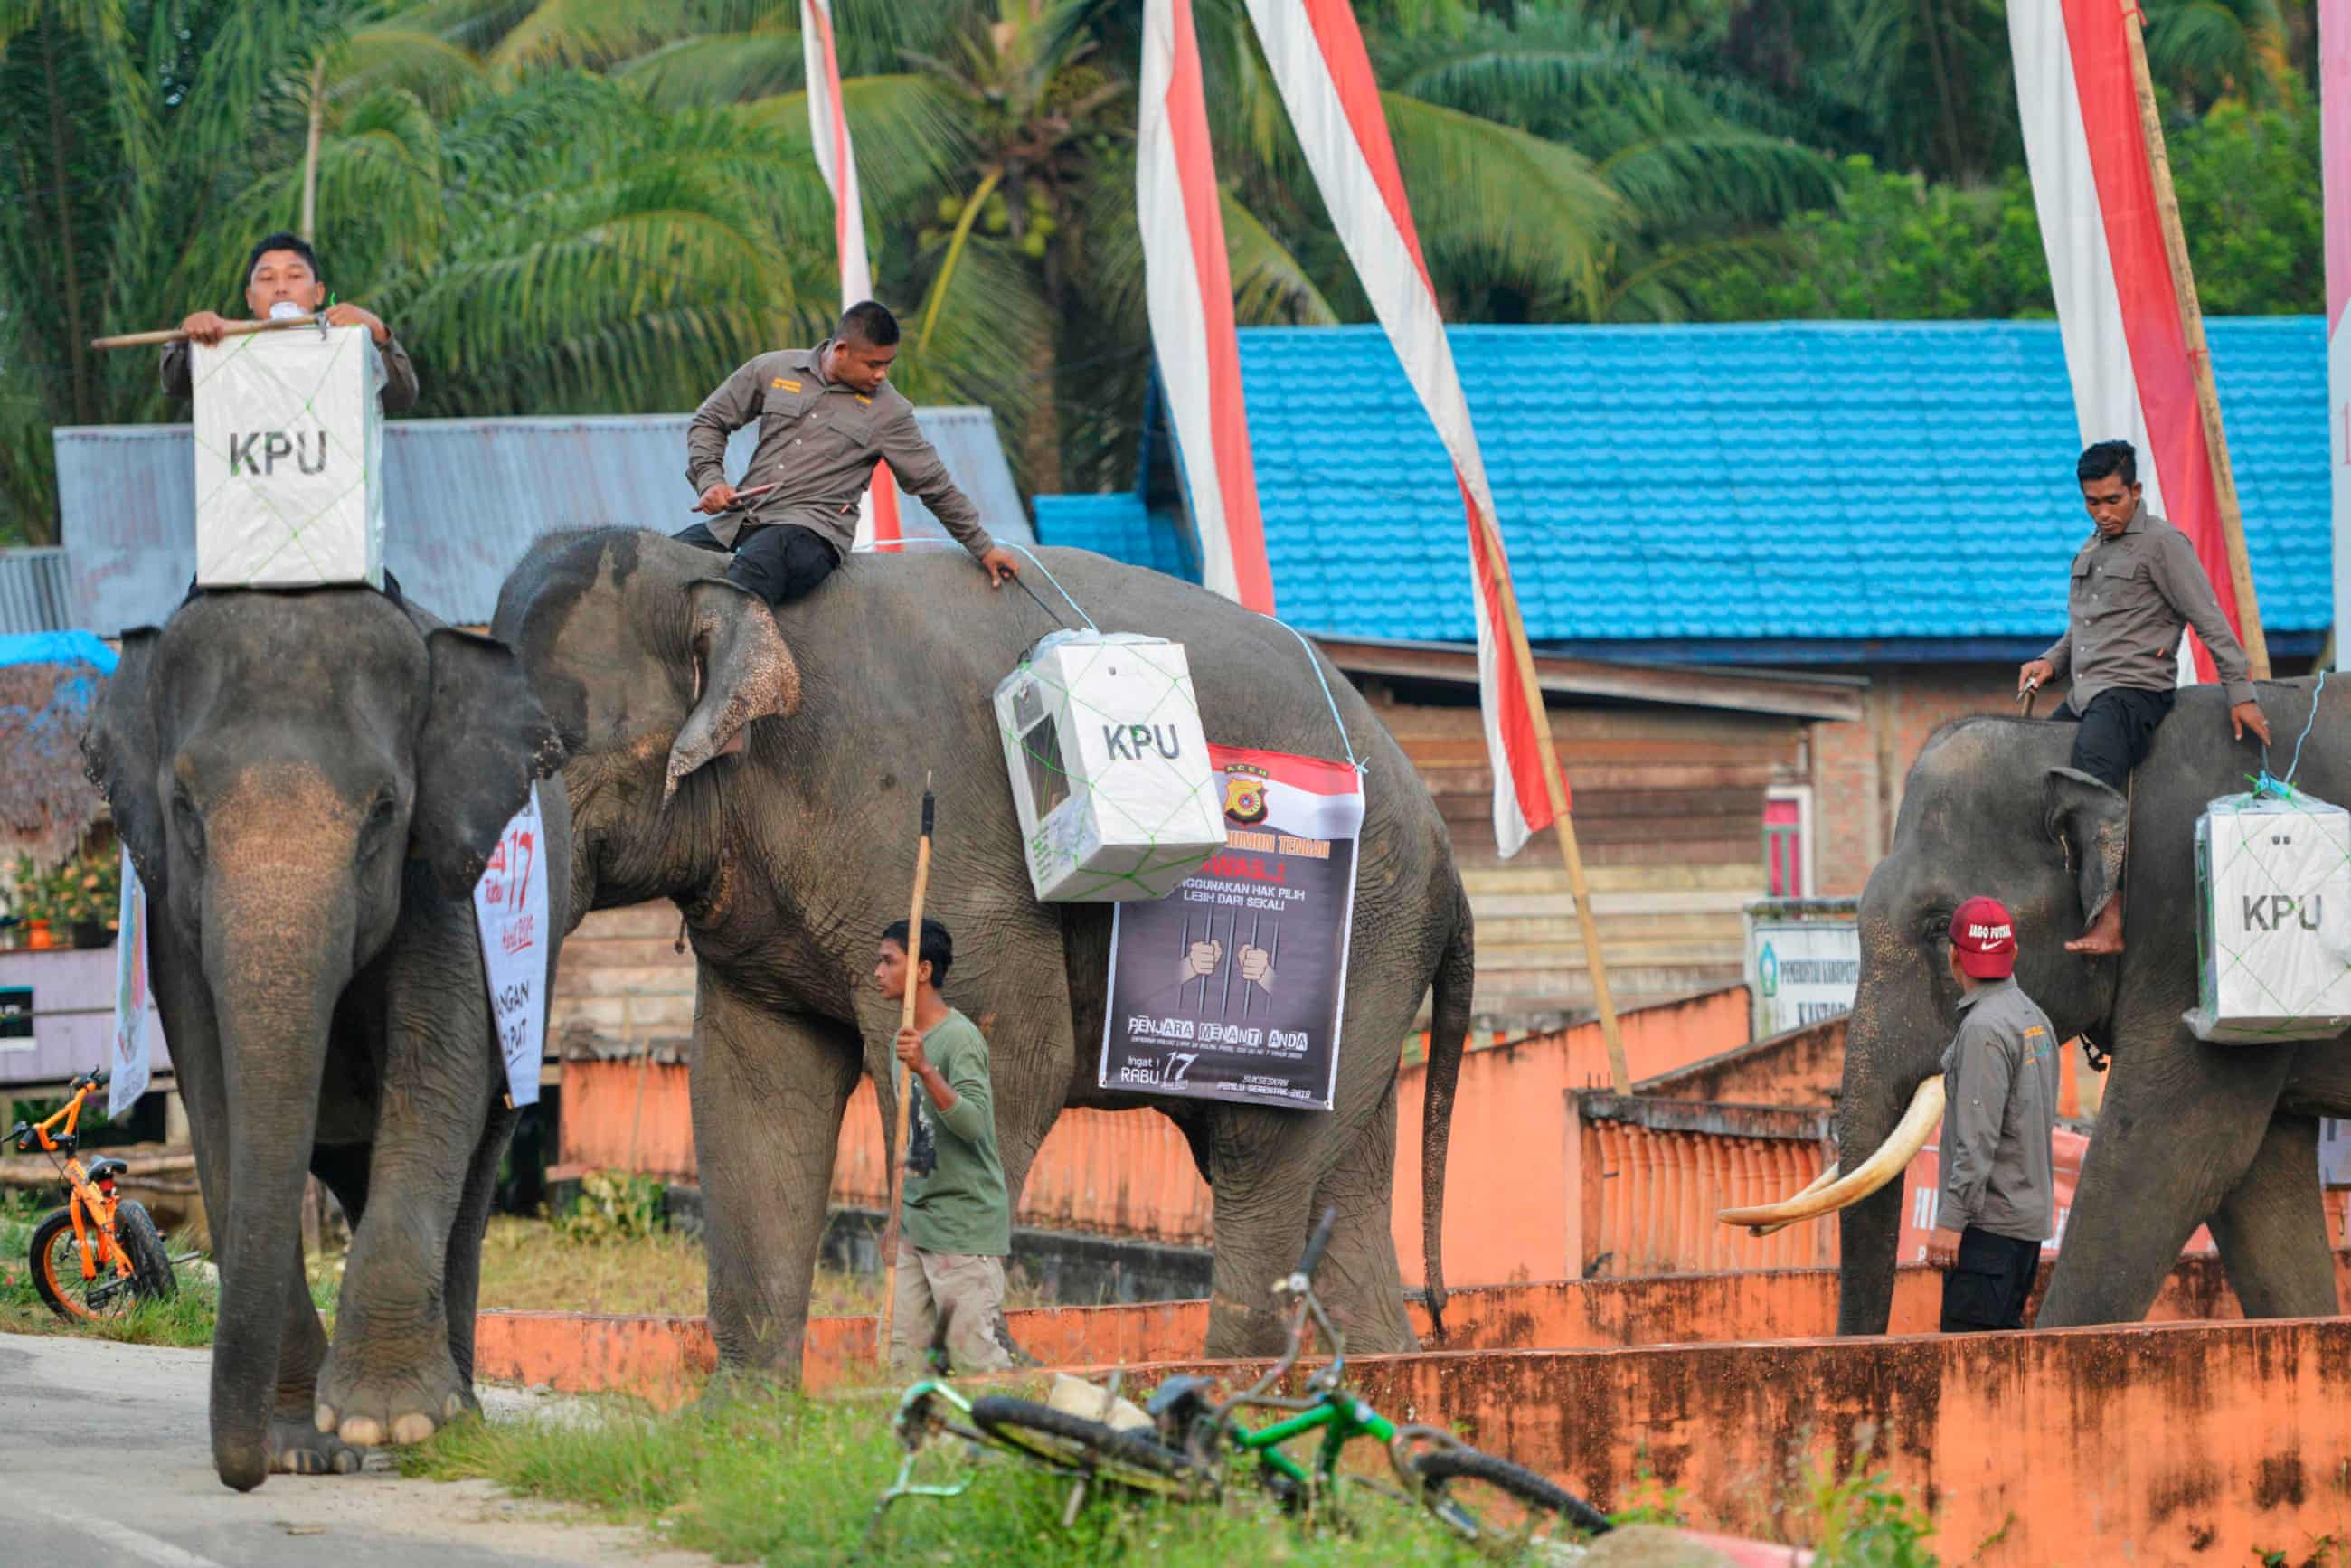 Photos of Indonesian Election Workers Riding Elephants & Crossing Rivers to Deliver Ballot Boxes Go Viral - WORLD OF BUZZ 3